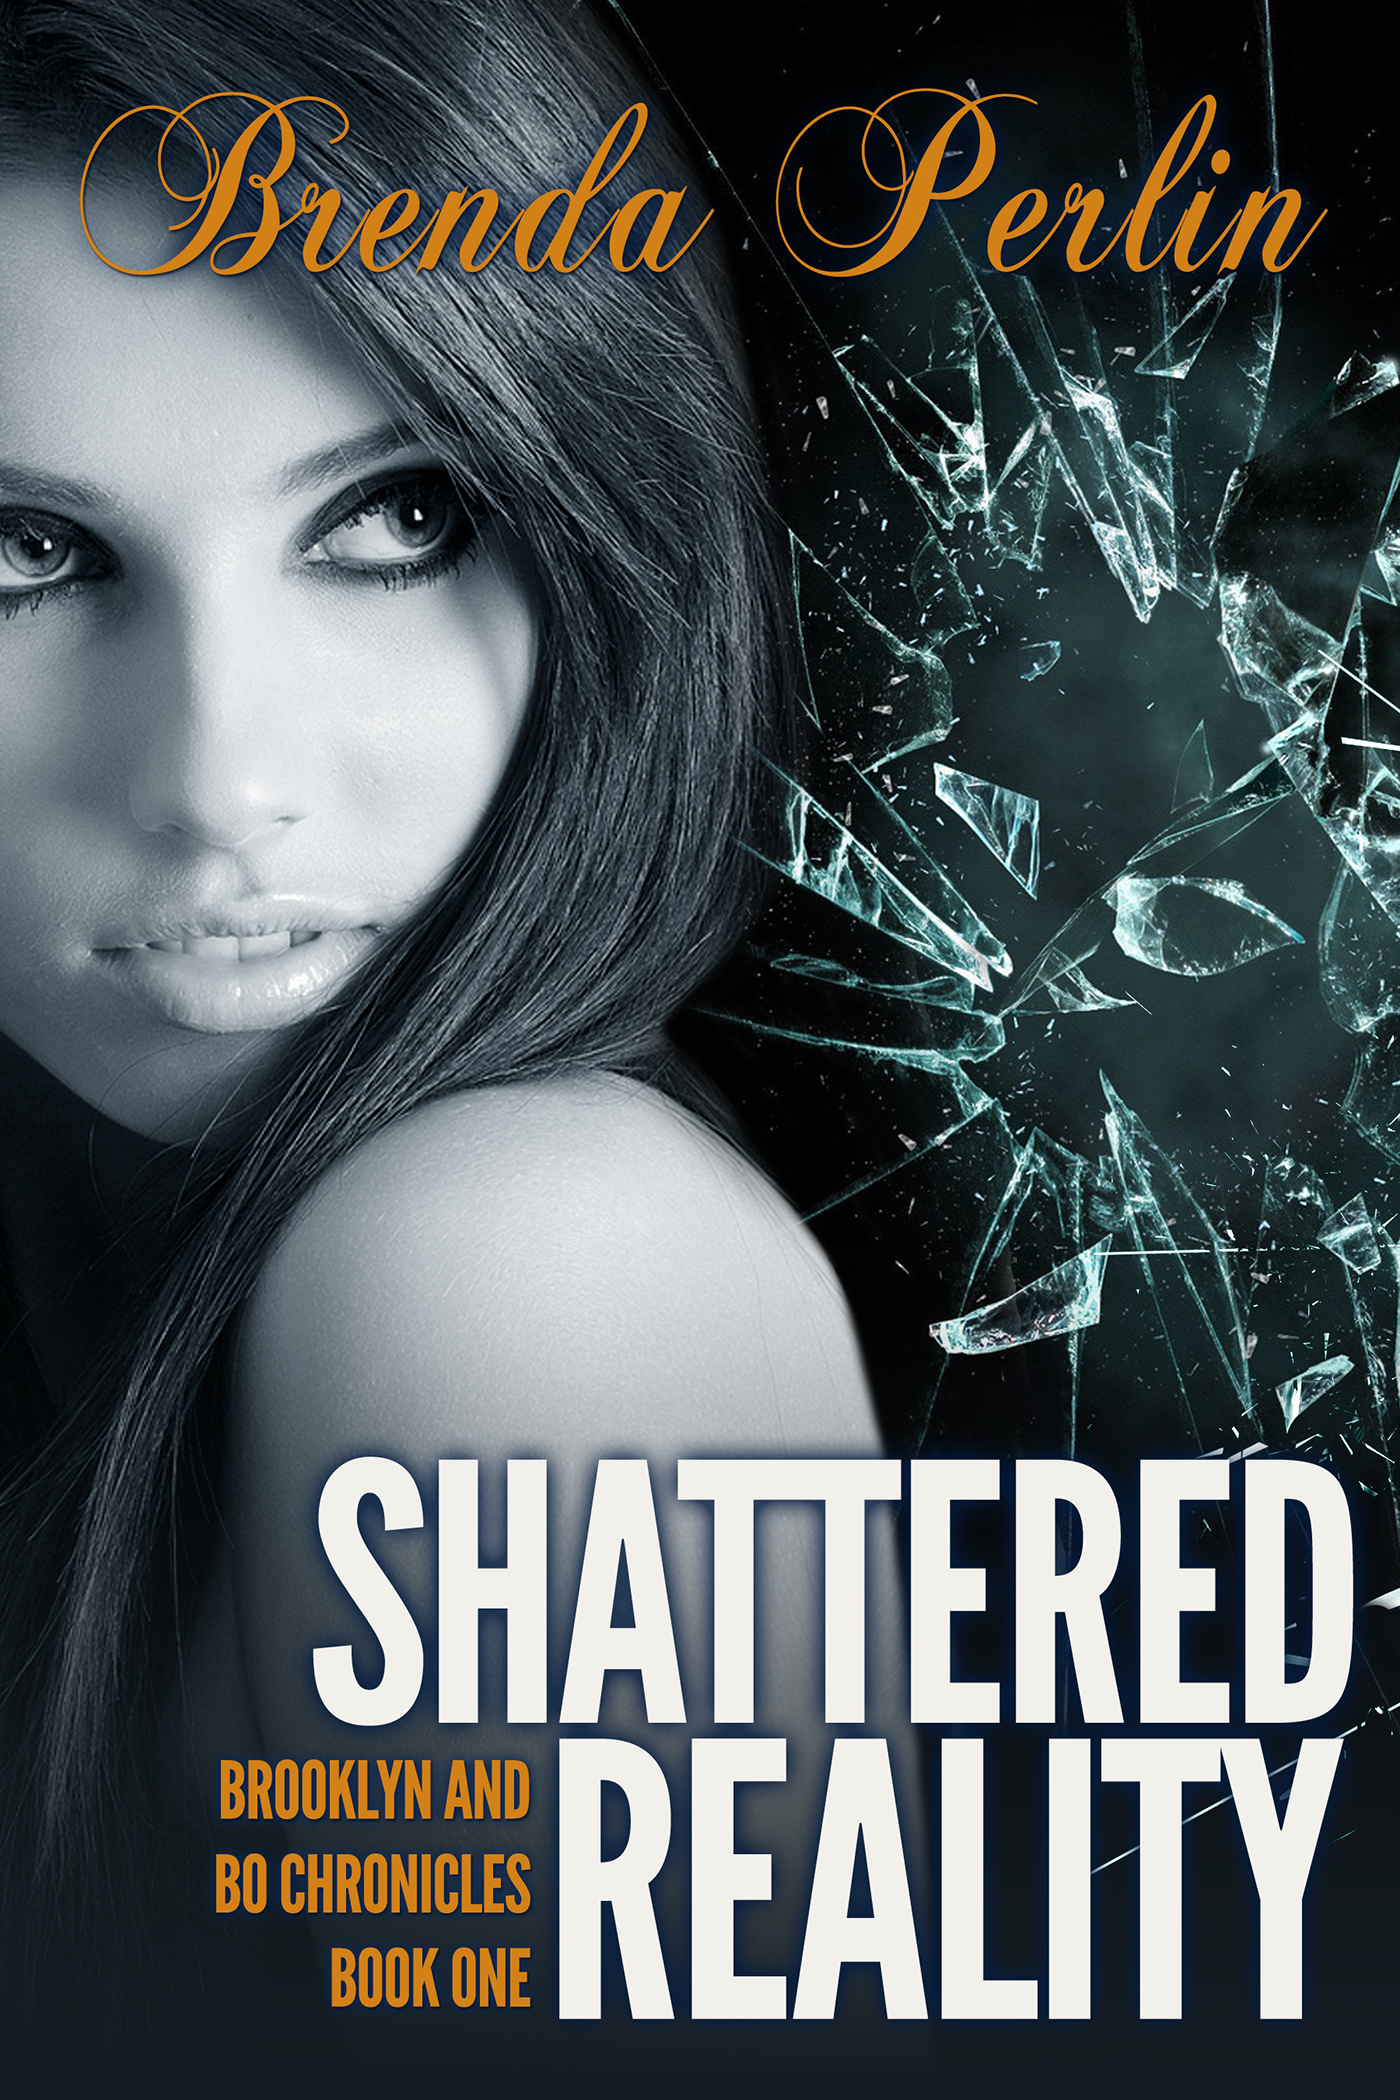 Shattered Reality (Brooklyn and Bo Chronicles: Book One)